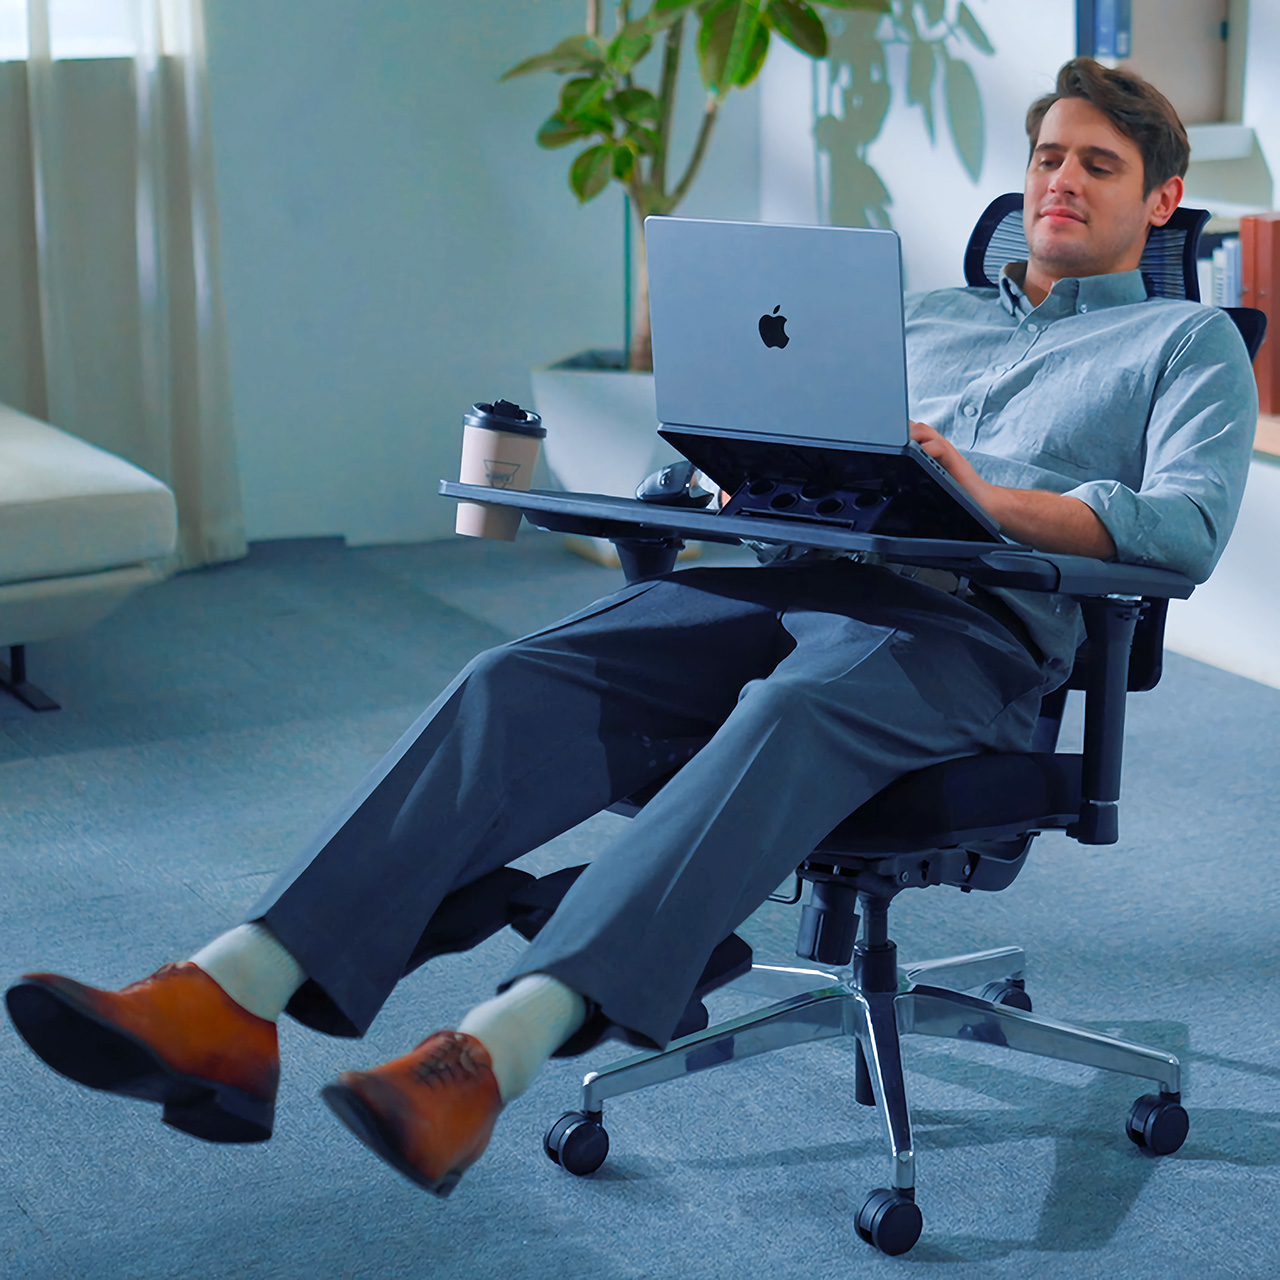 https://www.yankodesign.com/images/design_news/2023/07/this-brilliant-ergonomic-office-chair-brings-comfort-and-support-no-matter-how-you-sit/Ultra_Adaptive_Support_Home_Office_Chair_08.jpg